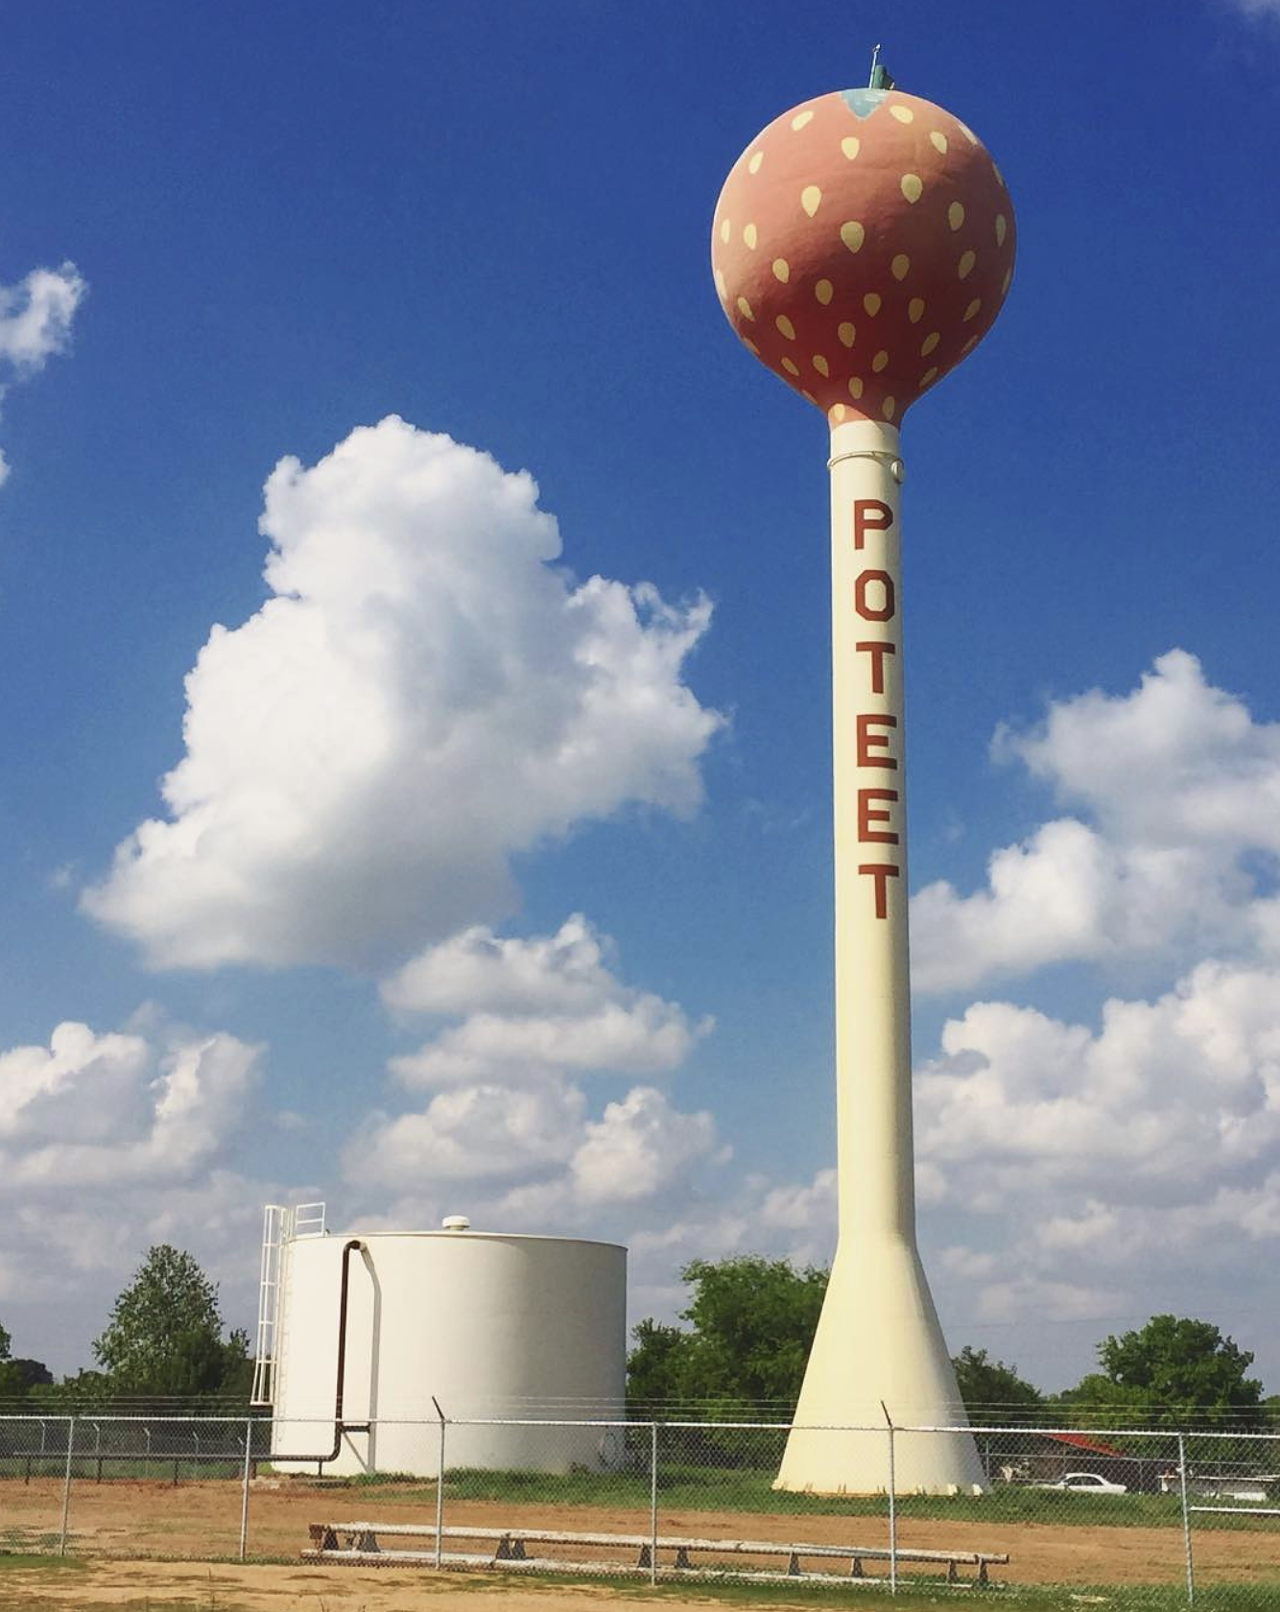 Strawberry Water Tower, Poteet, TX
Junction of Betty Louise Drive and Pecan St., Poteet, roadsideamerica.com
A towering 130-foot strawberry can be seen along Highway 16 as cars approach Poteet, giving a berry sweet welcome to all passerbys. 
Photo via Instagram /  ahoycharlie